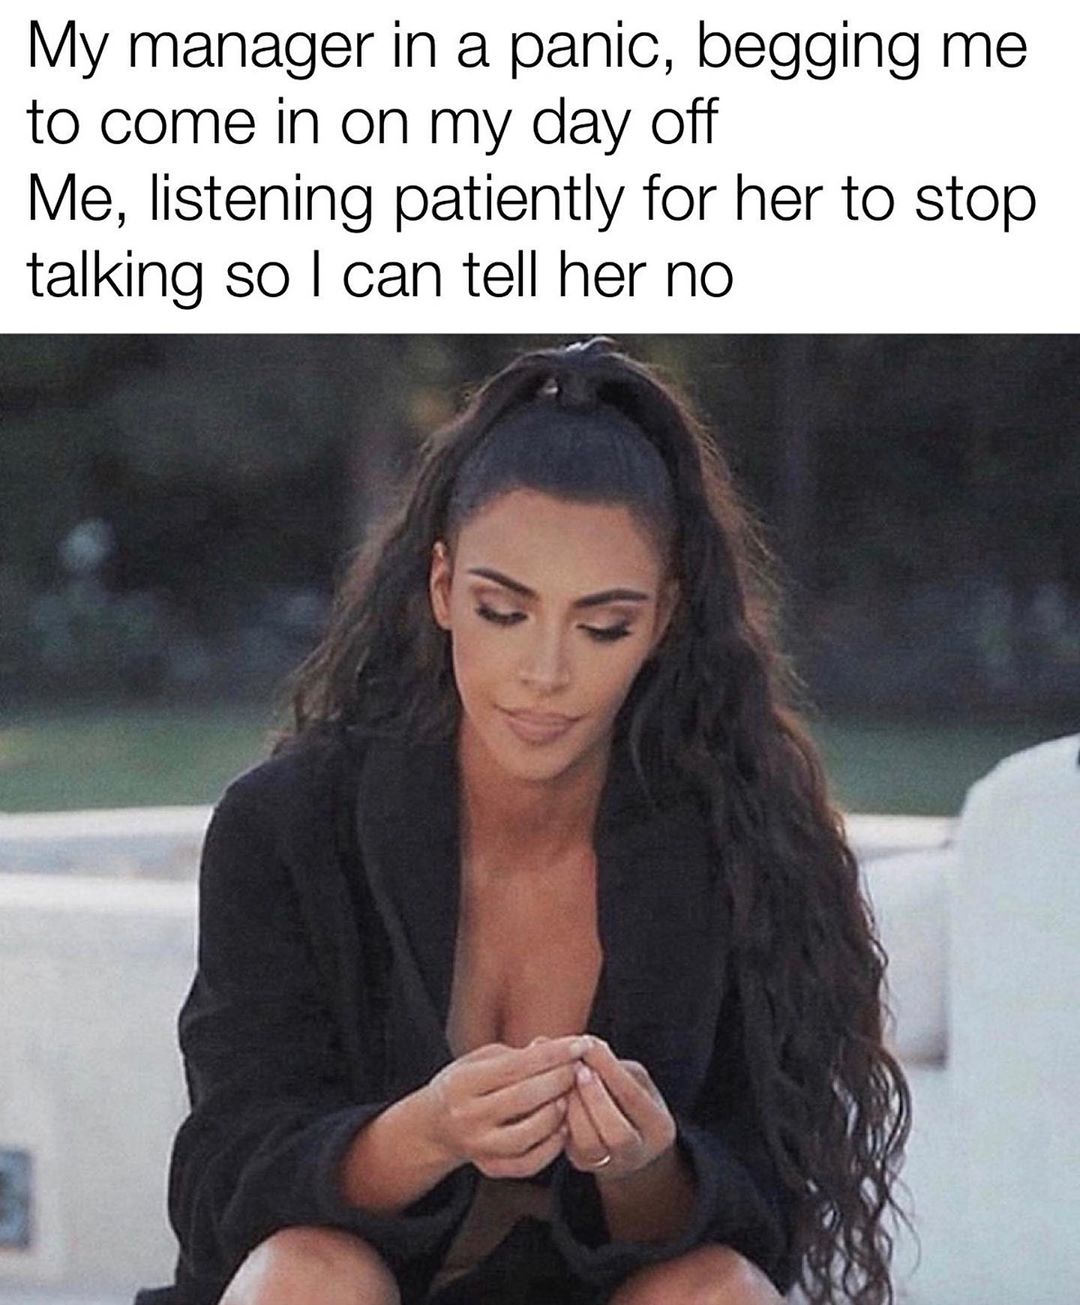 work memes - kim kardashian mood - My manager in a panic, begging me to come in on my day off Me, listening patiently for her to stop talking so I can tell her no